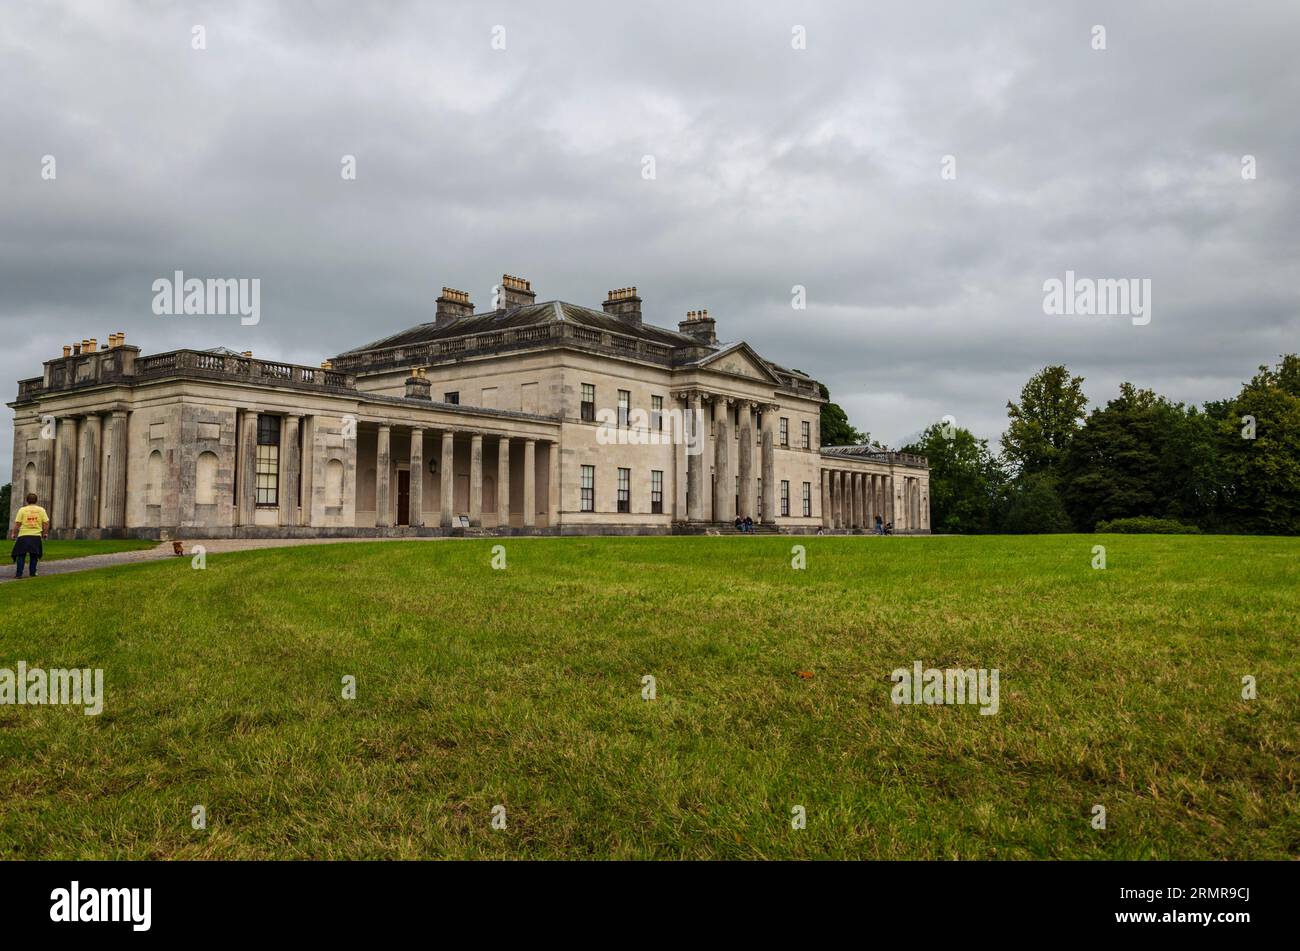 Enniskillen County Fermanagh Northern Ireland, Aguust 28 2023 - Castle Coole country house with large lawn Stock Photo